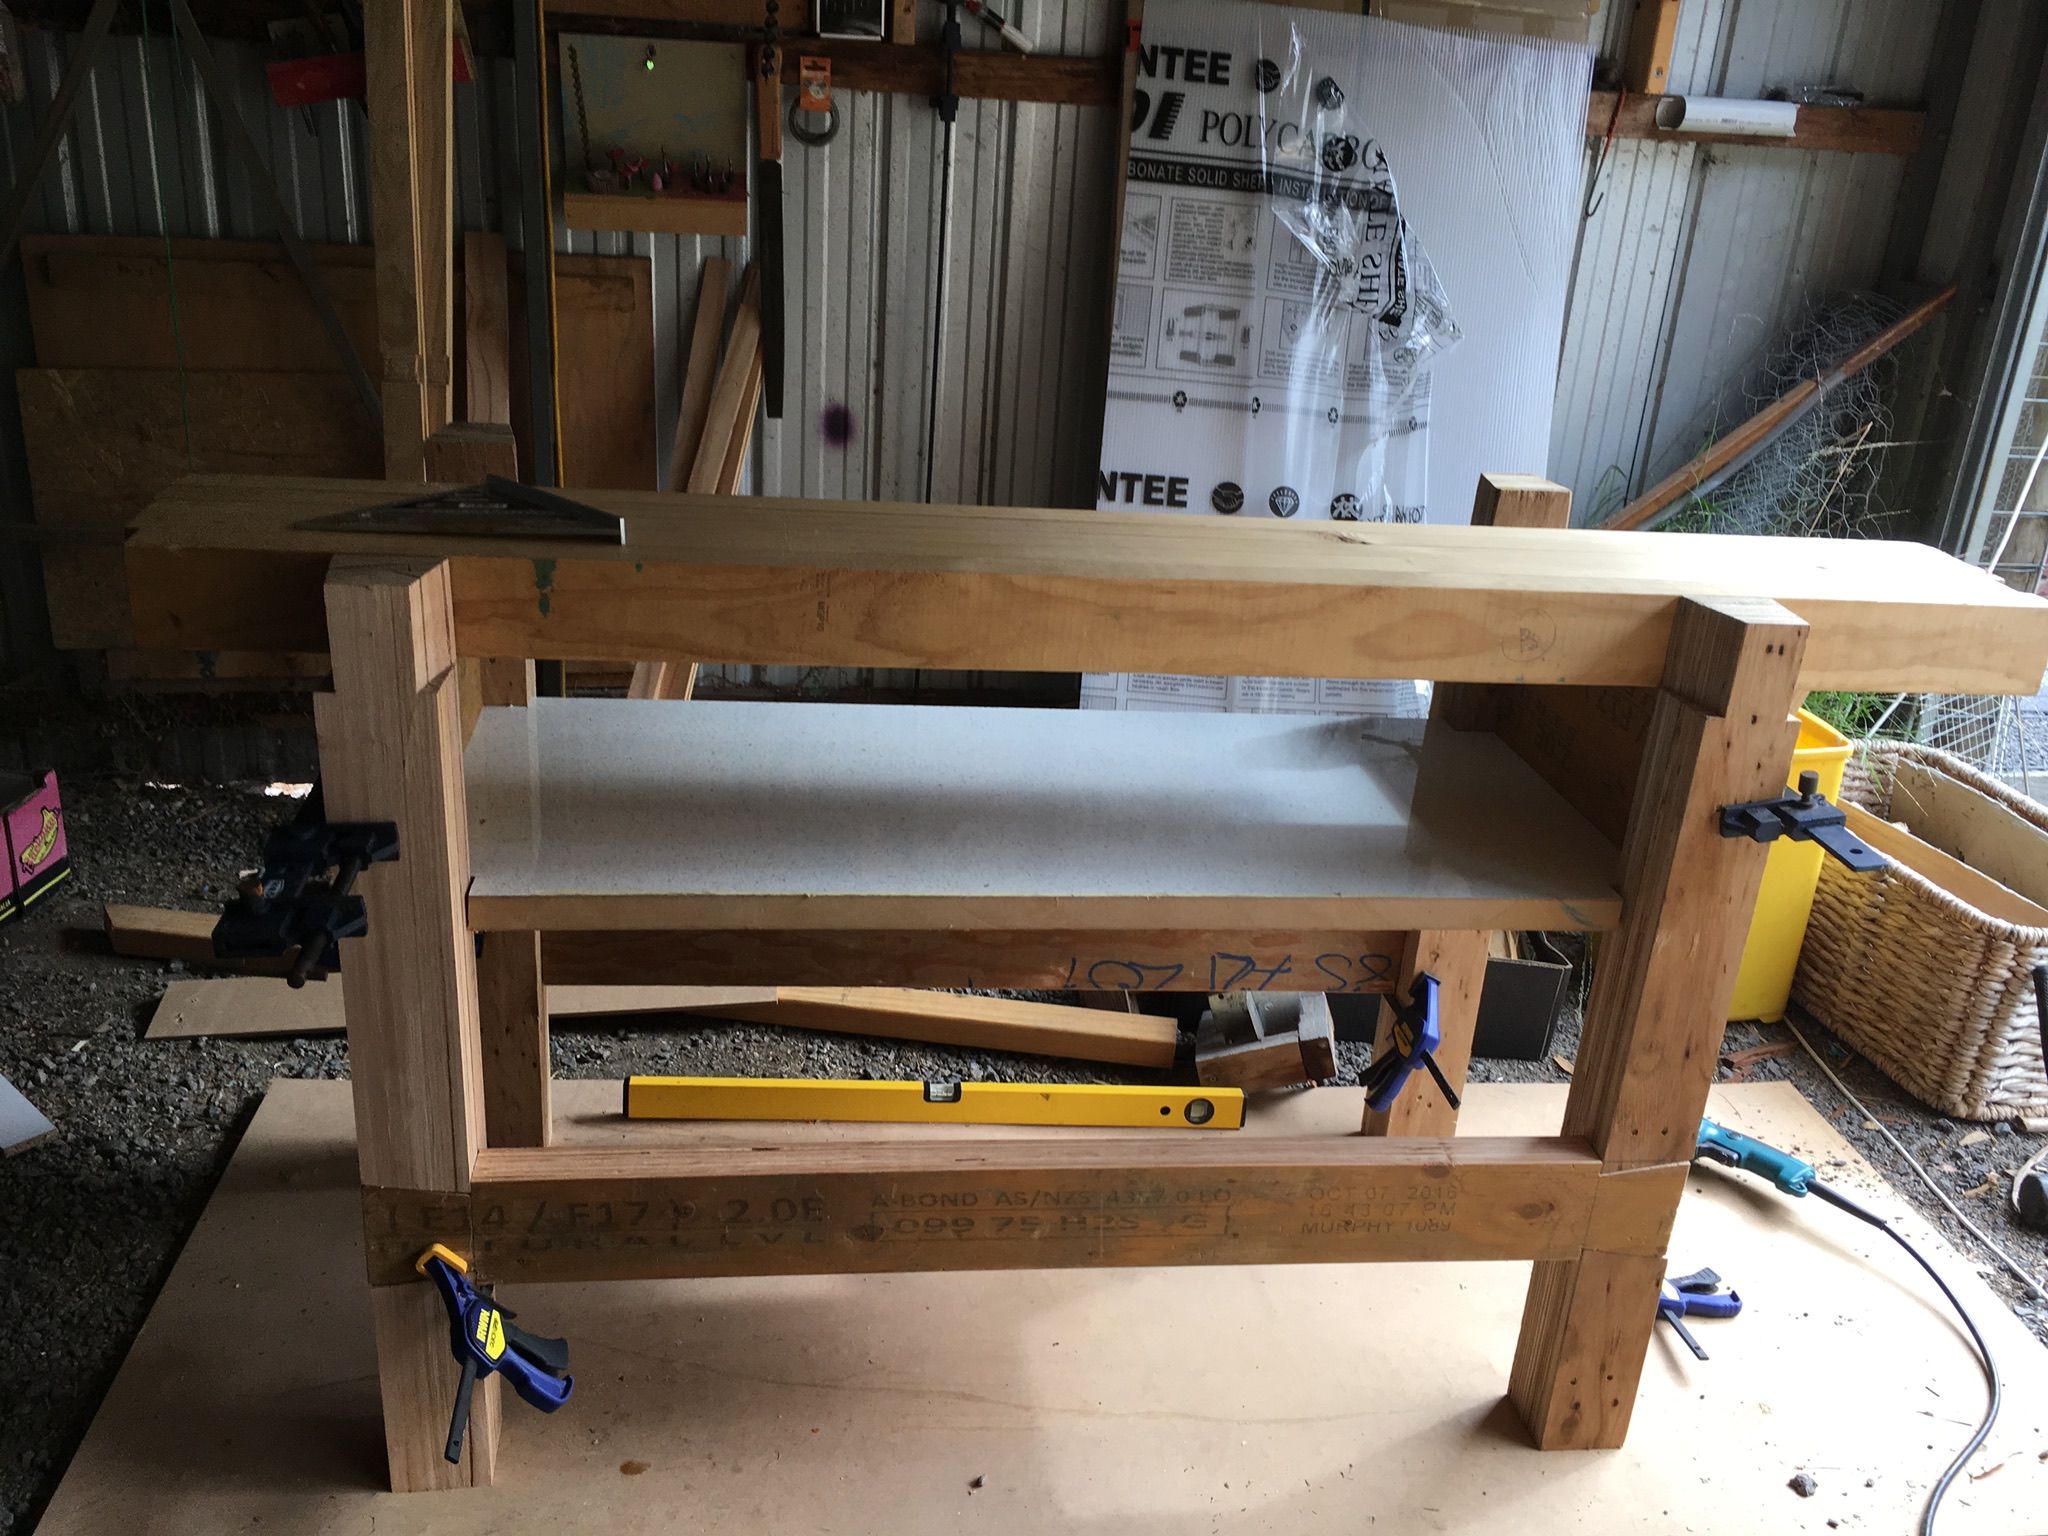 workbench - What are the holes on the skirts and legs of benches for? -  Woodworking Stack Exchange